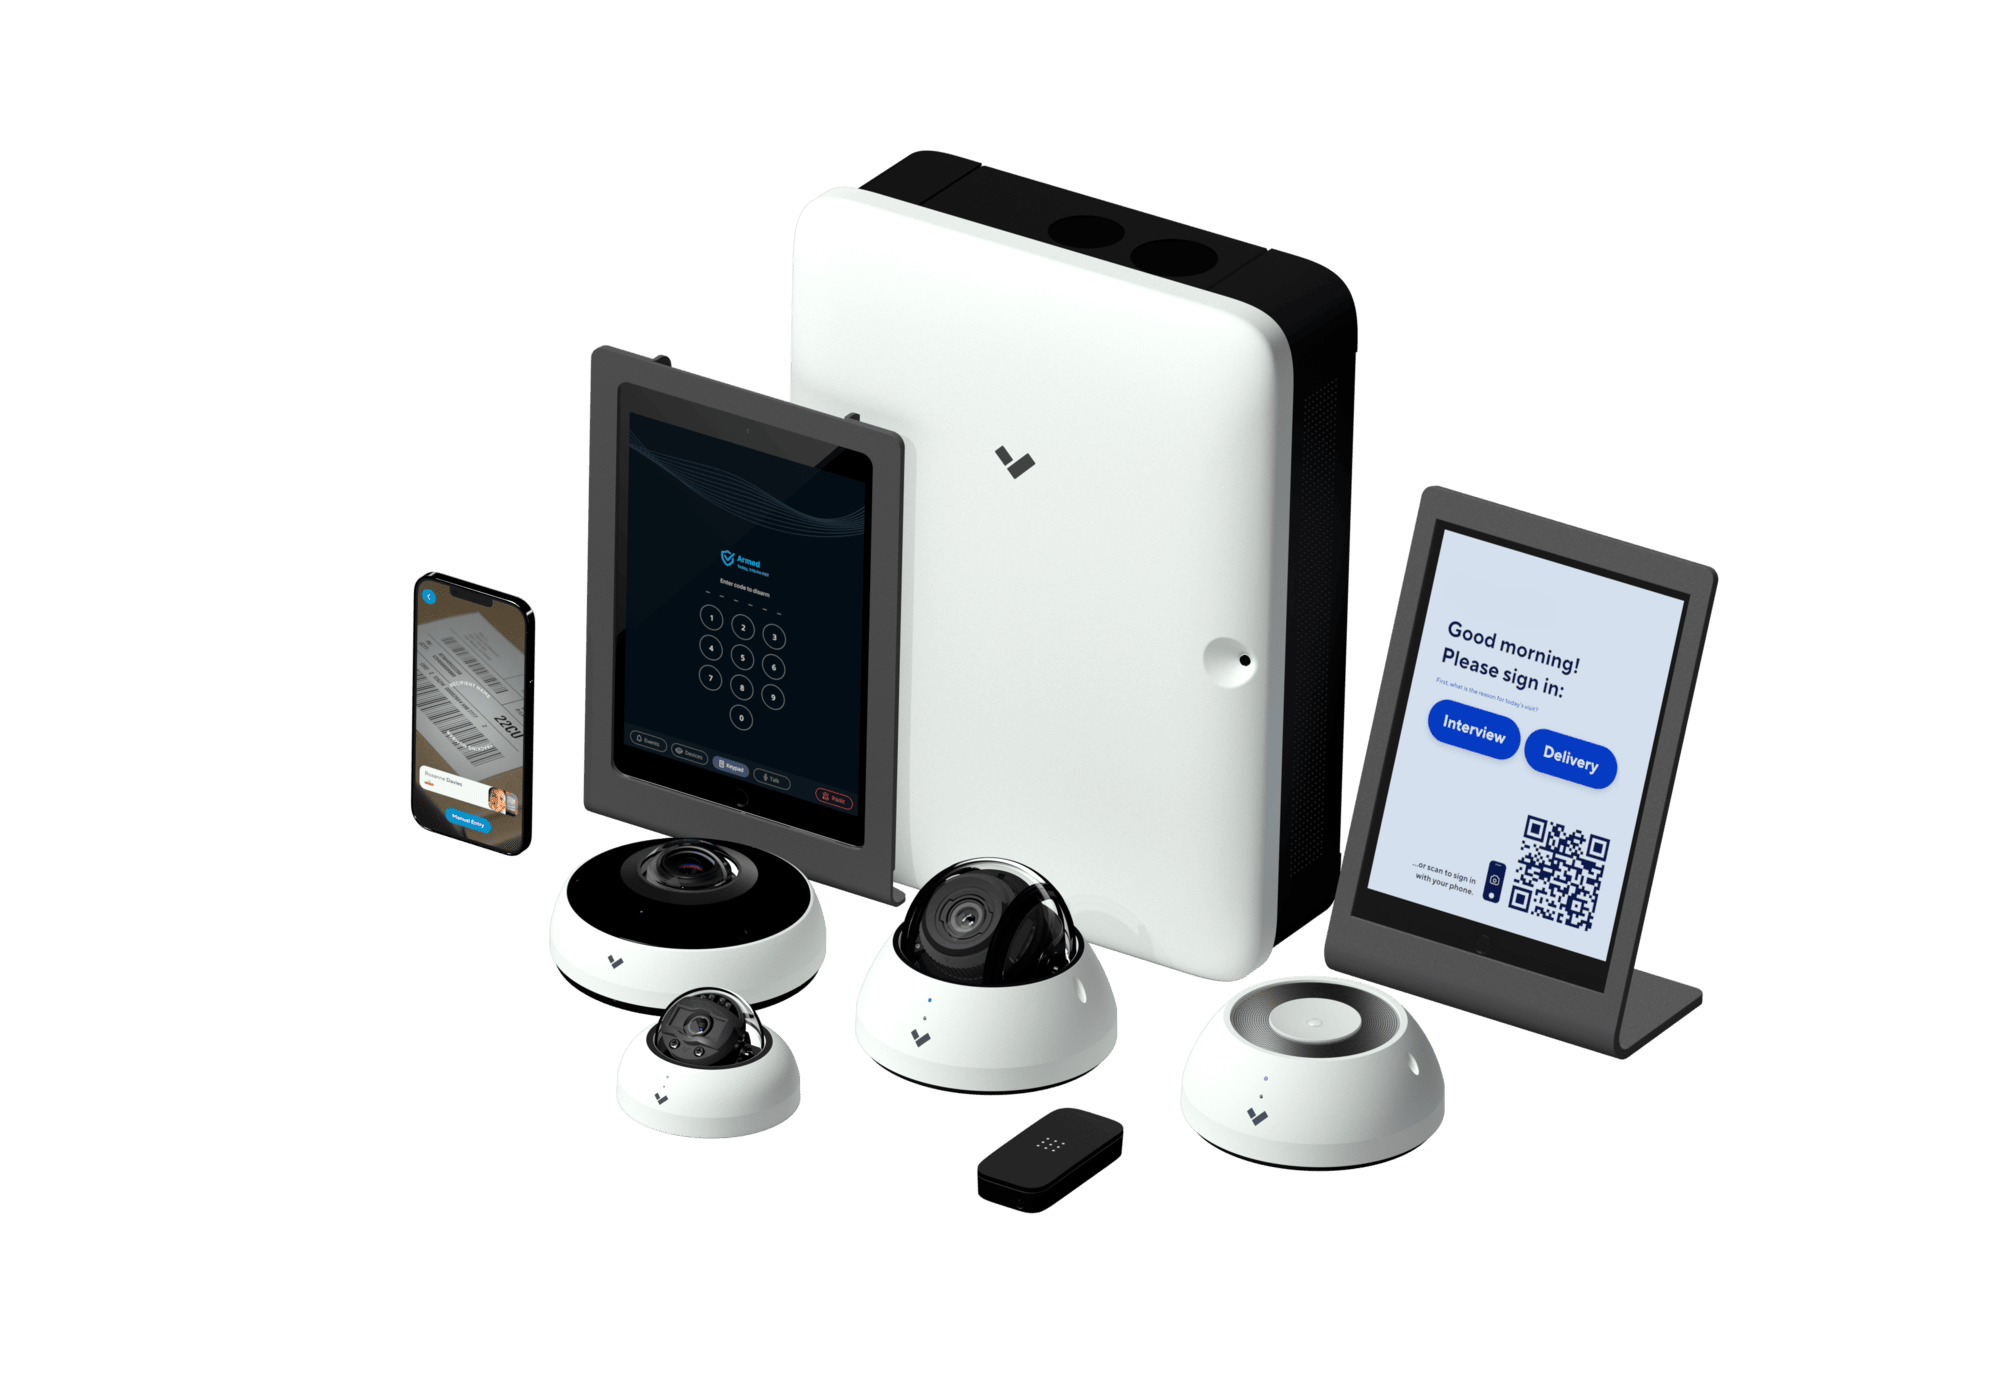 Verkada device family leaves no room to wonder, “what is the best video quality for security cameras”